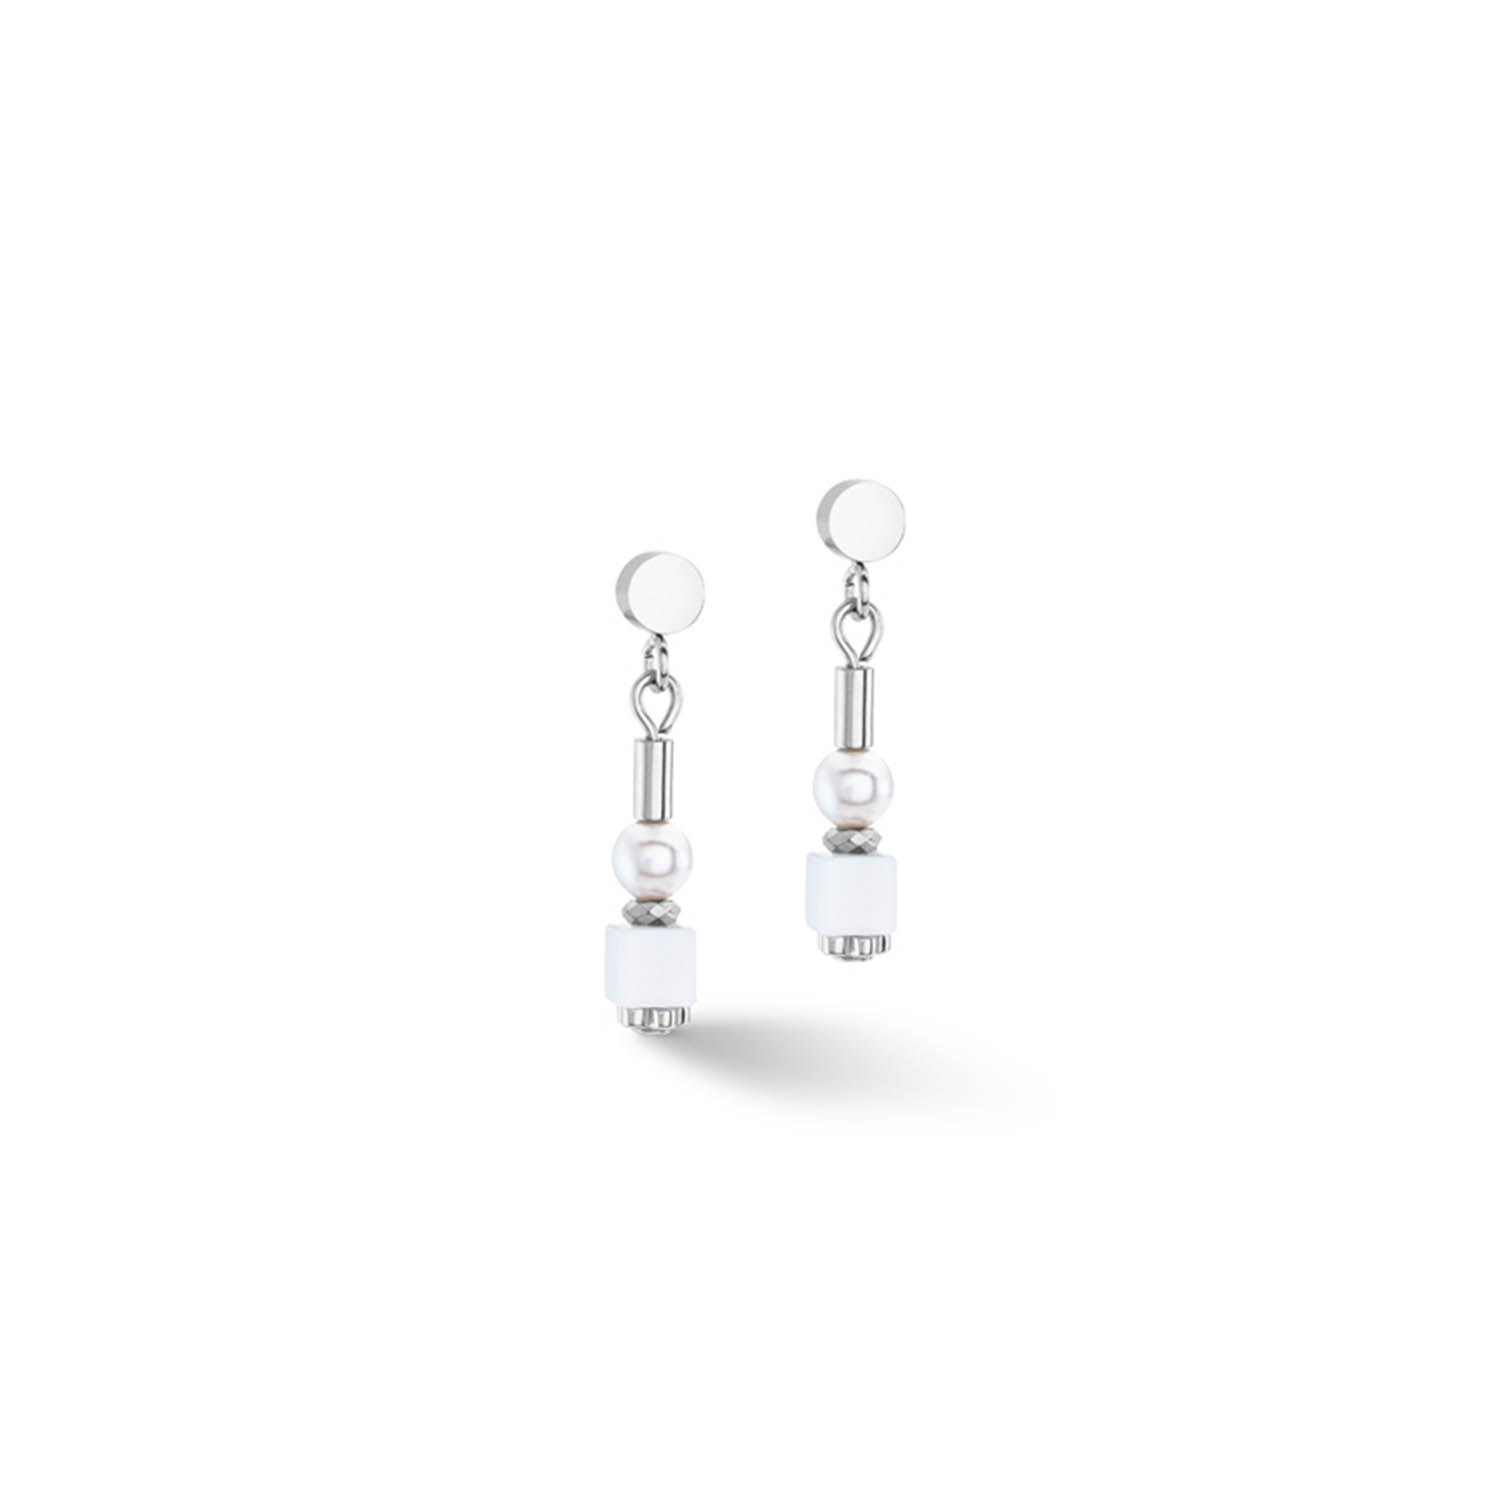 Mini Cubes & Pearls Mix Silver-White Earrings 4356/21_1417